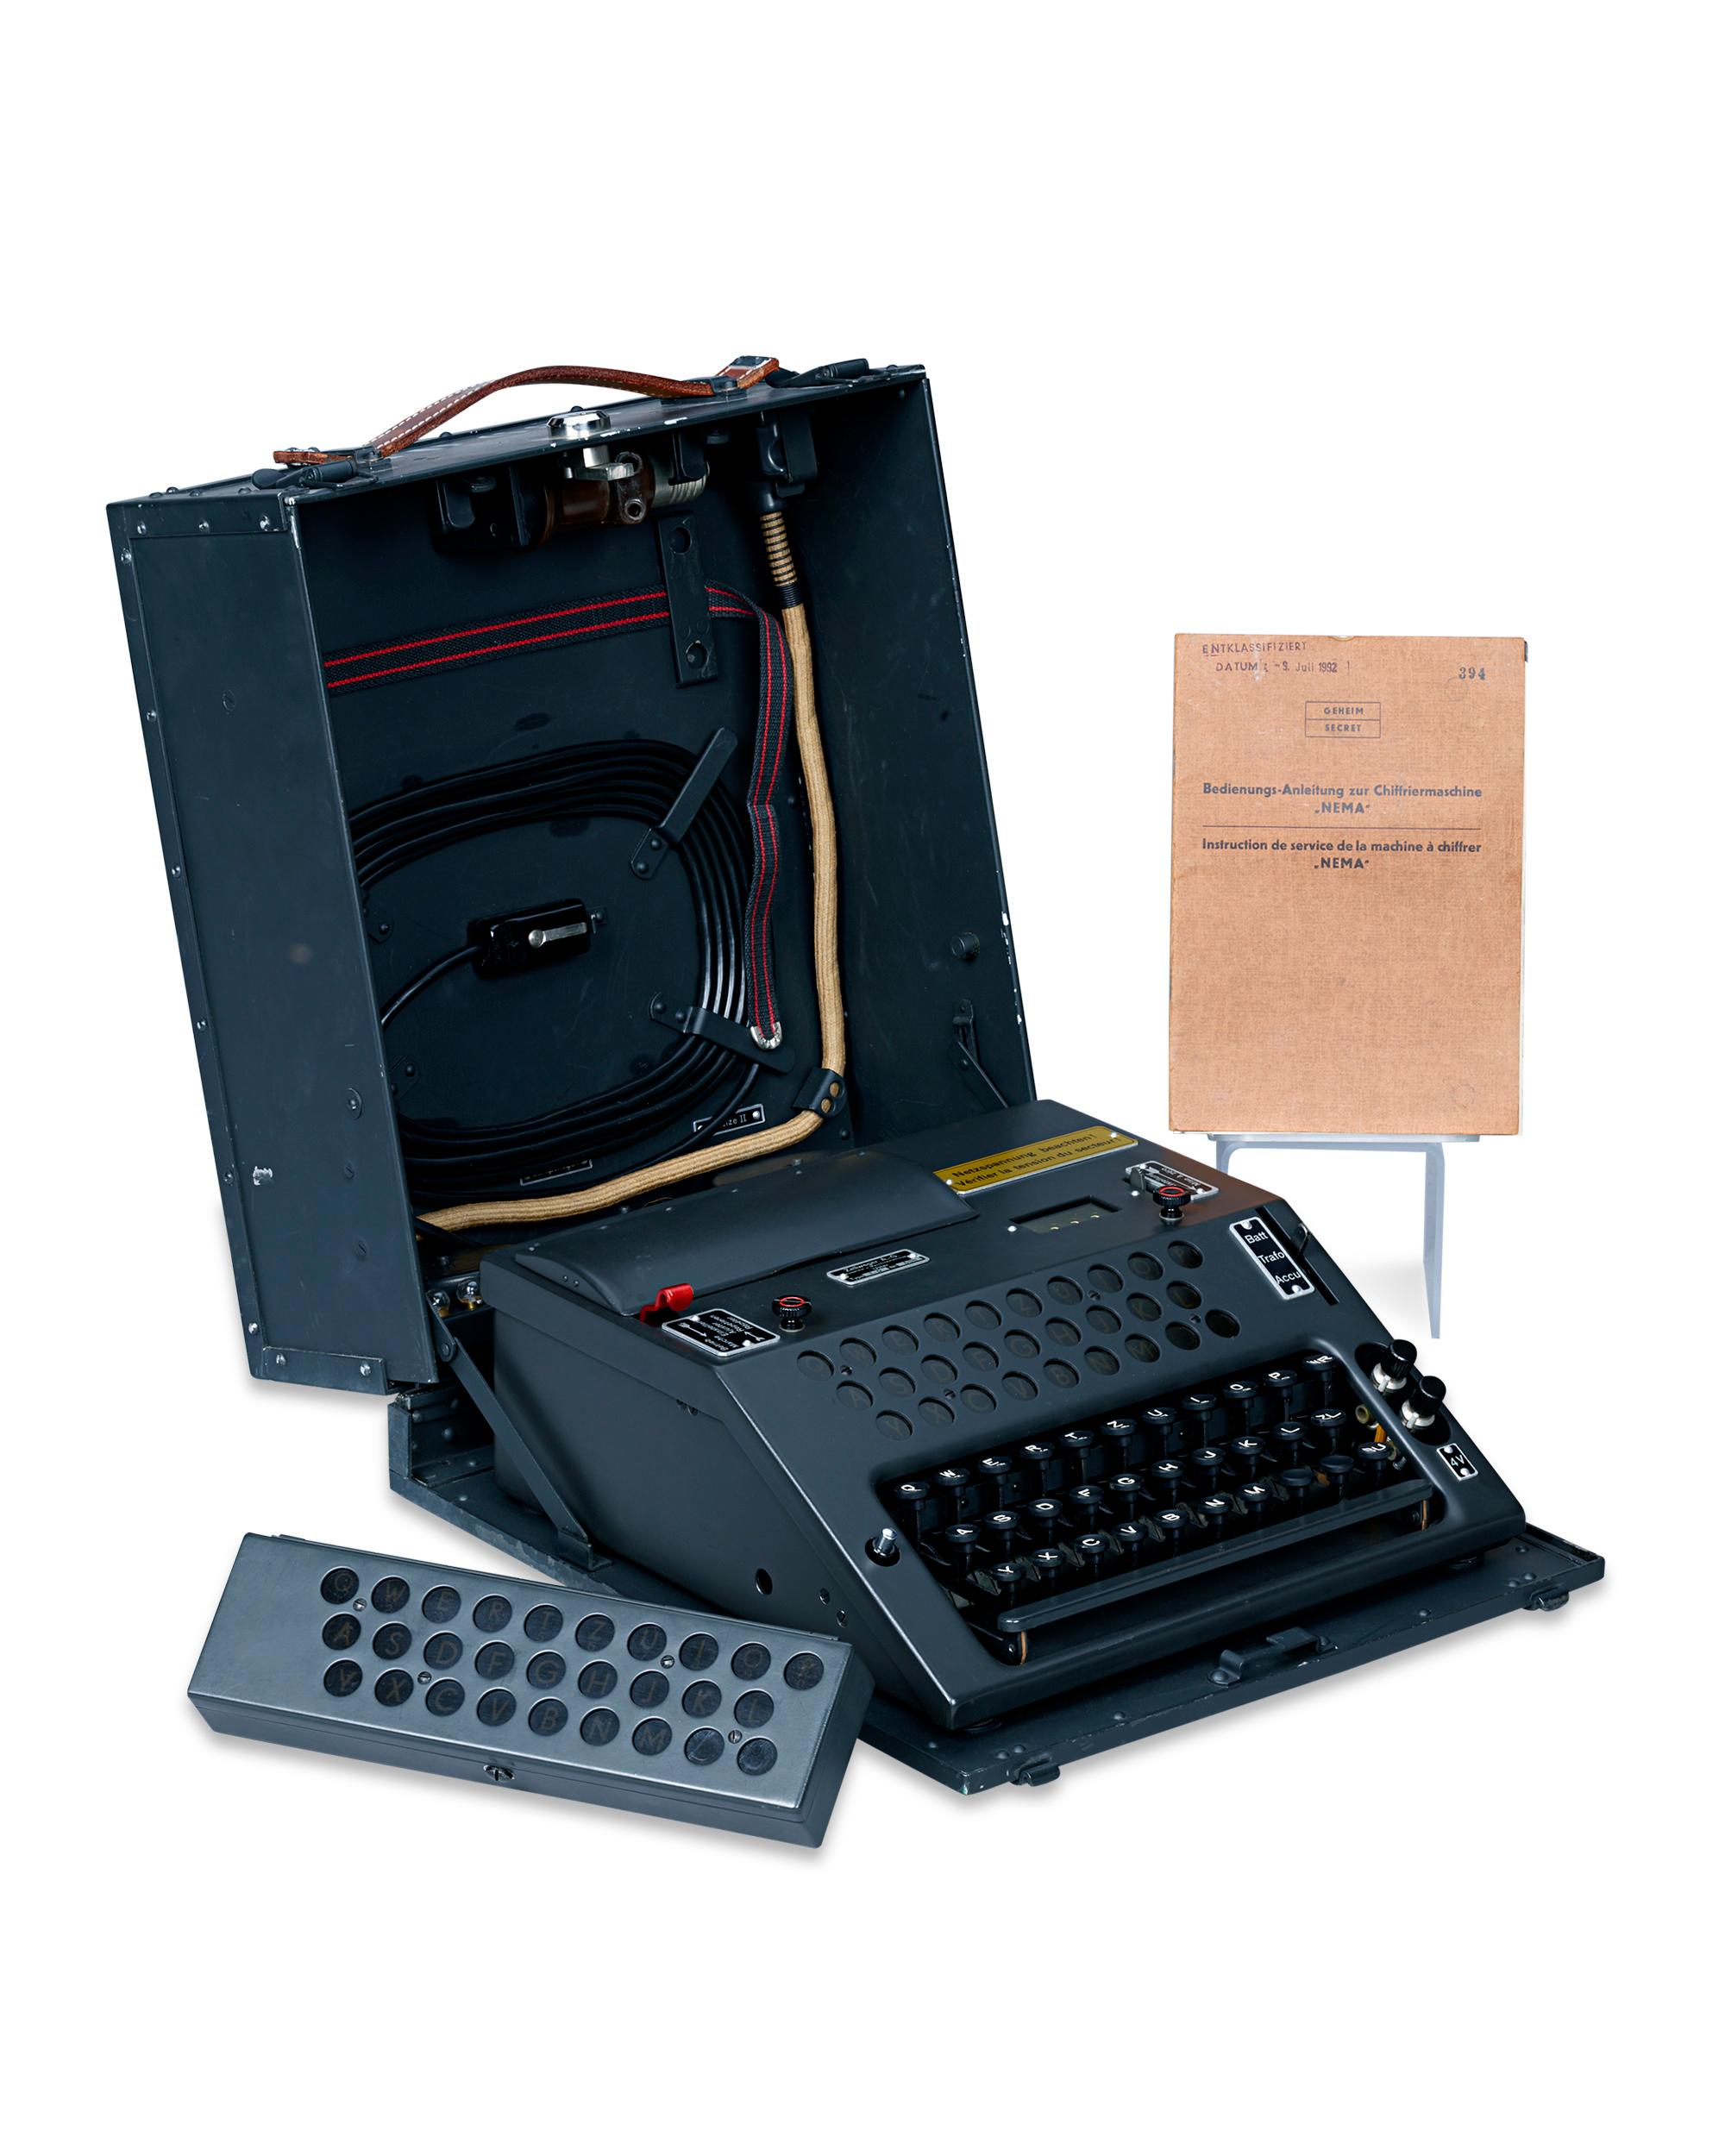 This Swiss-engineered cipher machine is a fascinating piece of 20th-century military and engineering history, and this particular example is one of the few rare models intended as a war machine. Called the NEMA, short for the Neue Machine, or “New